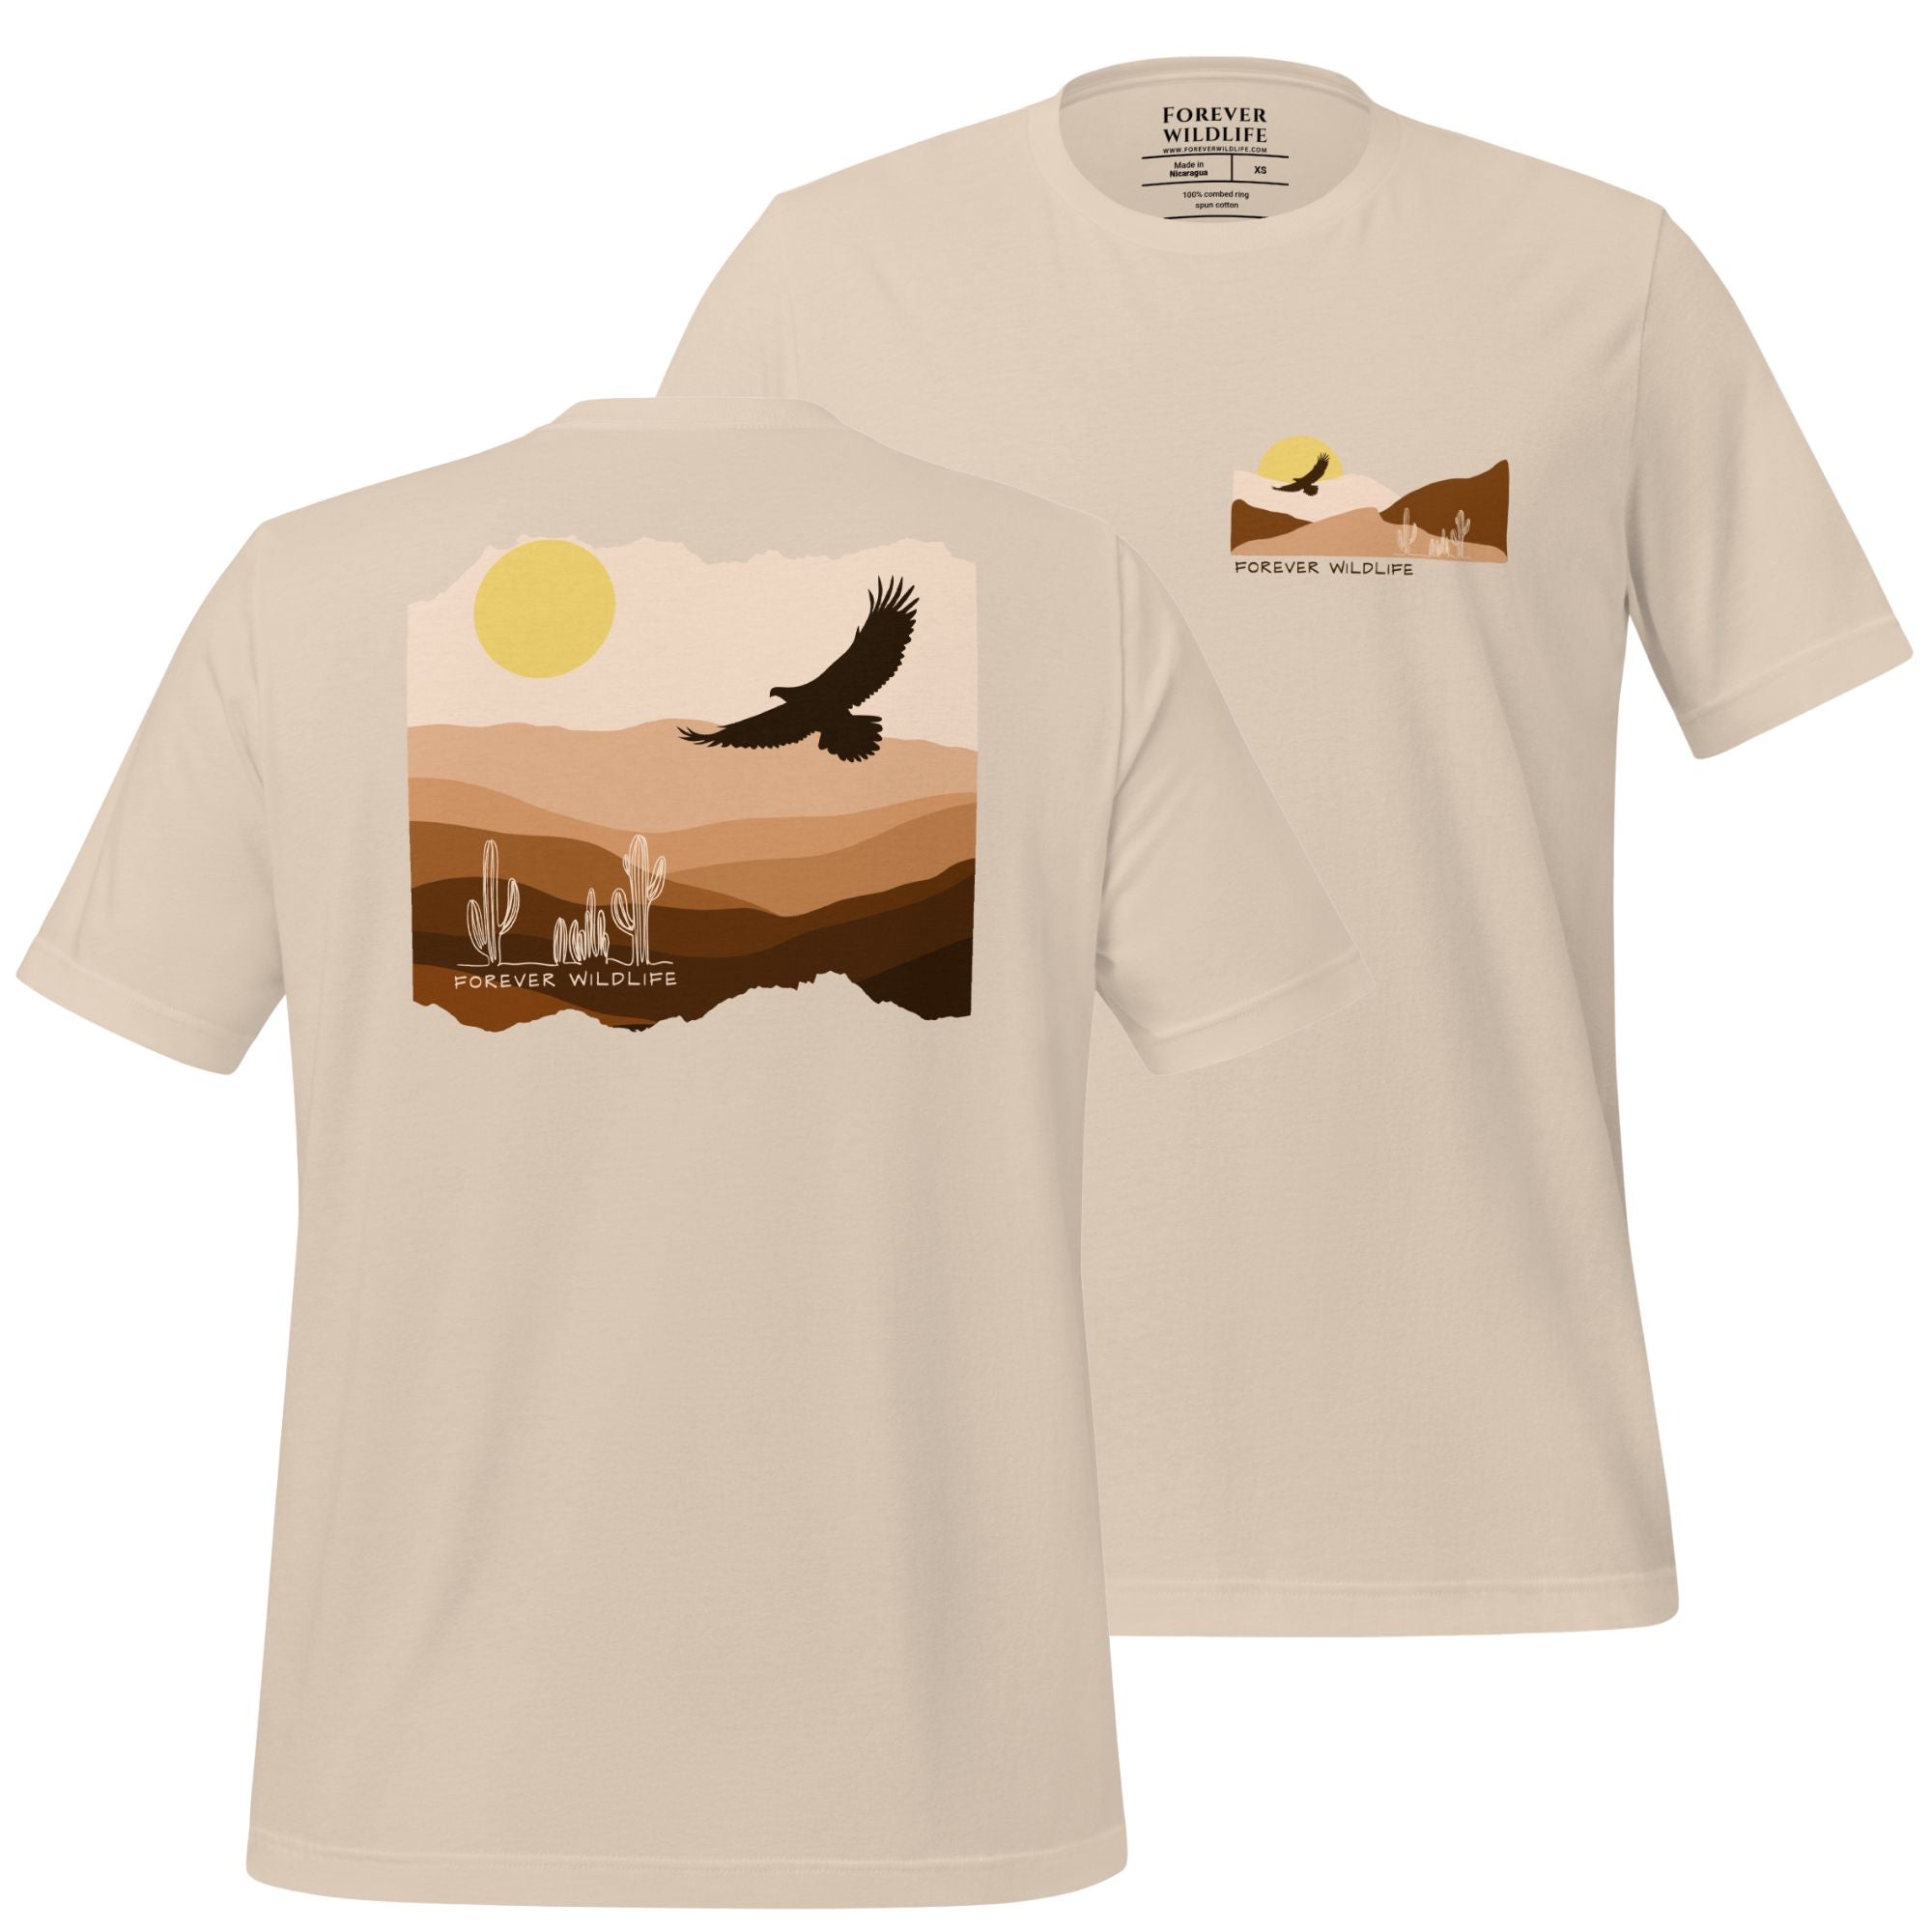 Eagle T-shirt, beautiful Soft Cream Eagle t-shirt with eagle soaring over the desert part of Wildlife t-shirts & Clothing collection.